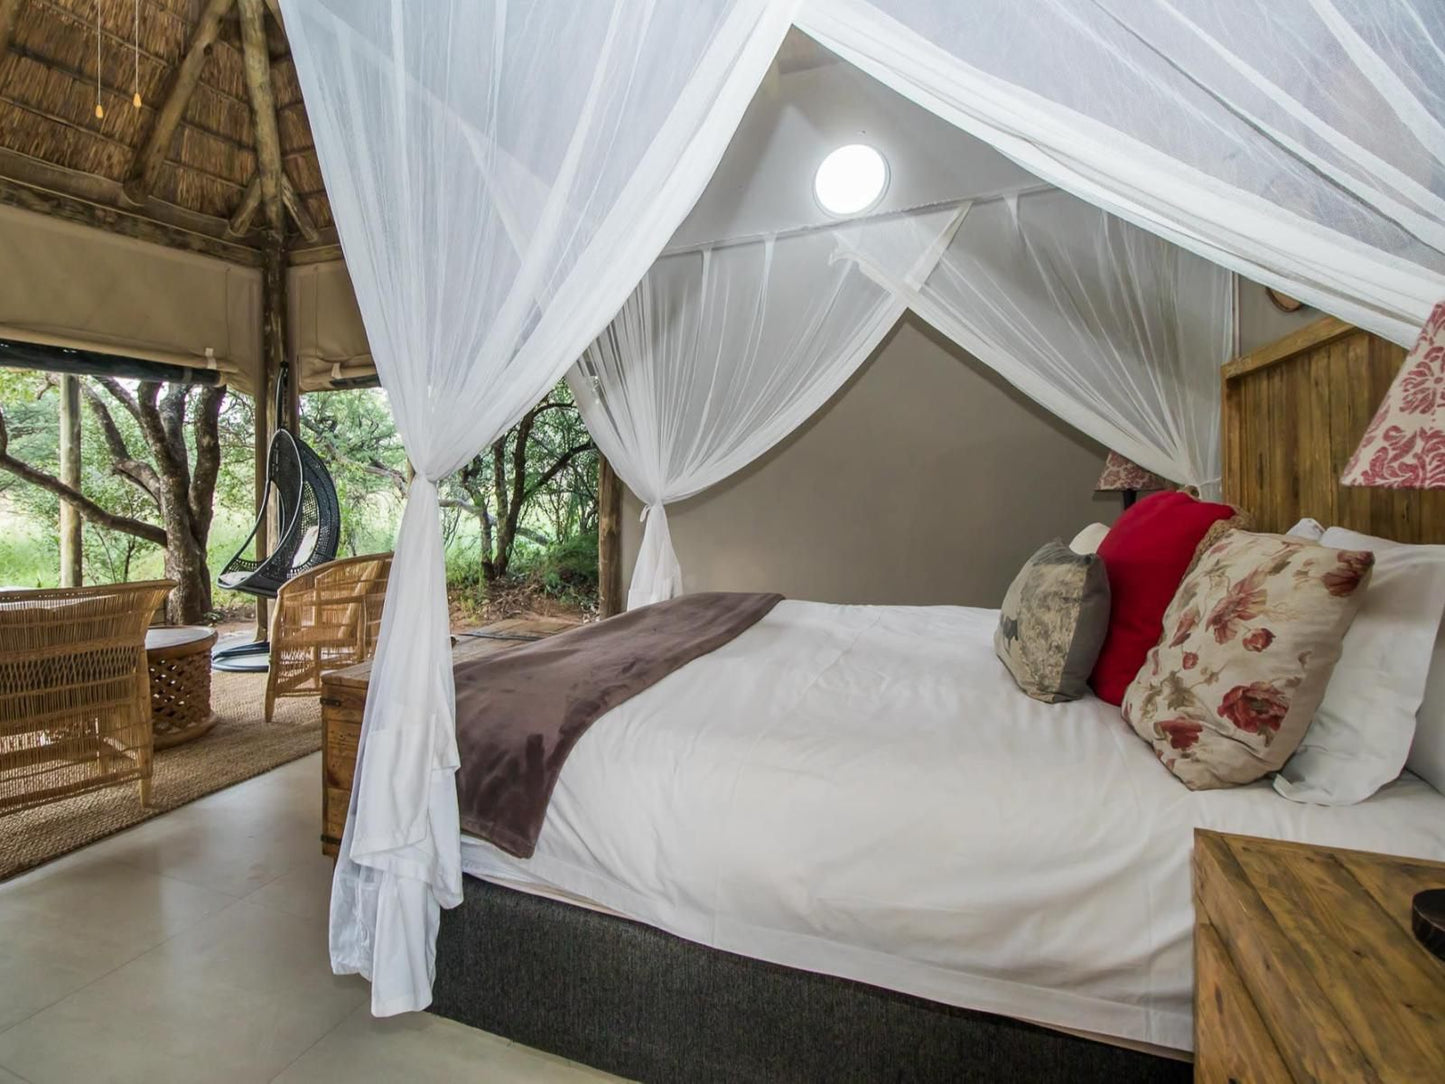 Lookoutsafarilodge The Heartbeat Of Africa Dinokeng Game Reserve Gauteng South Africa Tent, Architecture, Bedroom